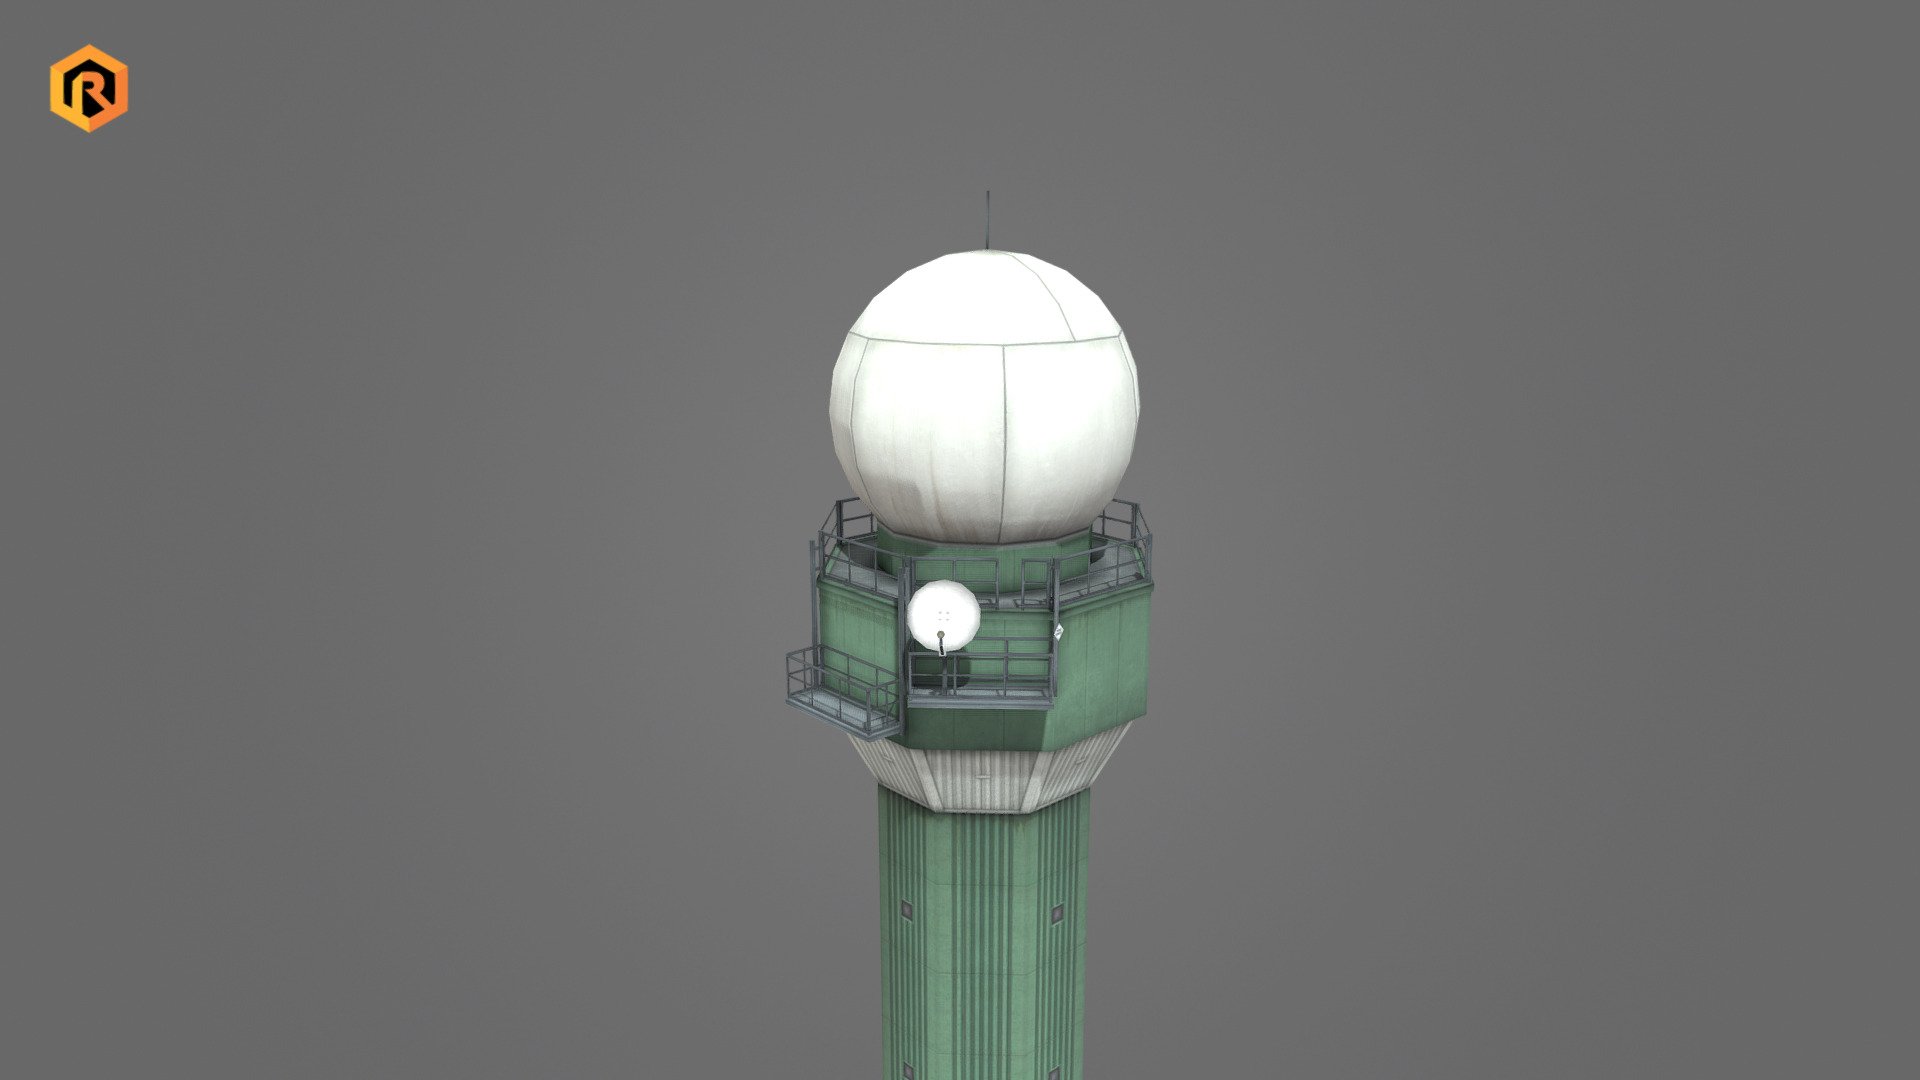 Low-poly 3D model of Weather Radar Tower.
It is best for use in games and other VR / AR, real-time applications such as Unity or Unreal Engine.  It can also be rendered in Blender (ex Cycles) or Vray as the model is equipped with detailed textures.  

You can also get this model in a bundle: https://skfb.ly/owqyZ

Technical details:




2048 x 2048 Diffuse and AO textures

872 Triangles

478 Polygons

671 Vertices

Model is one mesh.

Model is completely unwrapped.

Model is fully textured with all materials applied. 

Lot of additional file formats included (Blender, Unity, Maya etc.)

More file formats are available in additional zip file on product page.

Please feel free to contact me if you have any questions or need any support for this asset.

Support e-mail: support@rescue3d.com - Weather Radar Tower - Buy Royalty Free 3D model by Rescue3D Assets (@rescue3d) 3d model